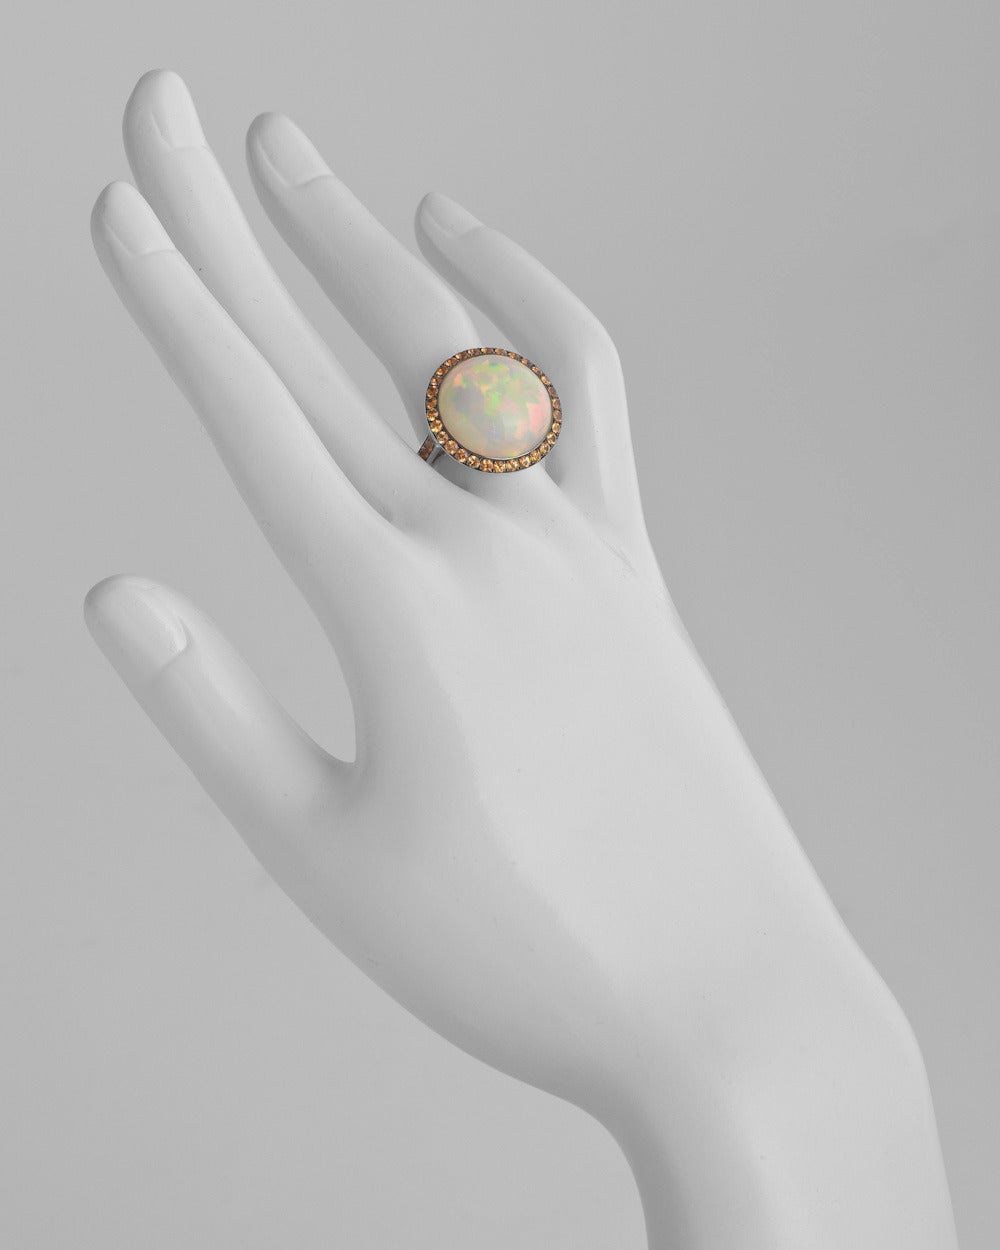 Round cabochon-cut opal cocktail ring, with a pavé orange sapphire surround and partway pavé orange sapphire band, the opal weighing 13.90 carats (18mm diameter) and 42 sapphires weighing 1.17 total carats, mounted in 18k white gold. Designed by